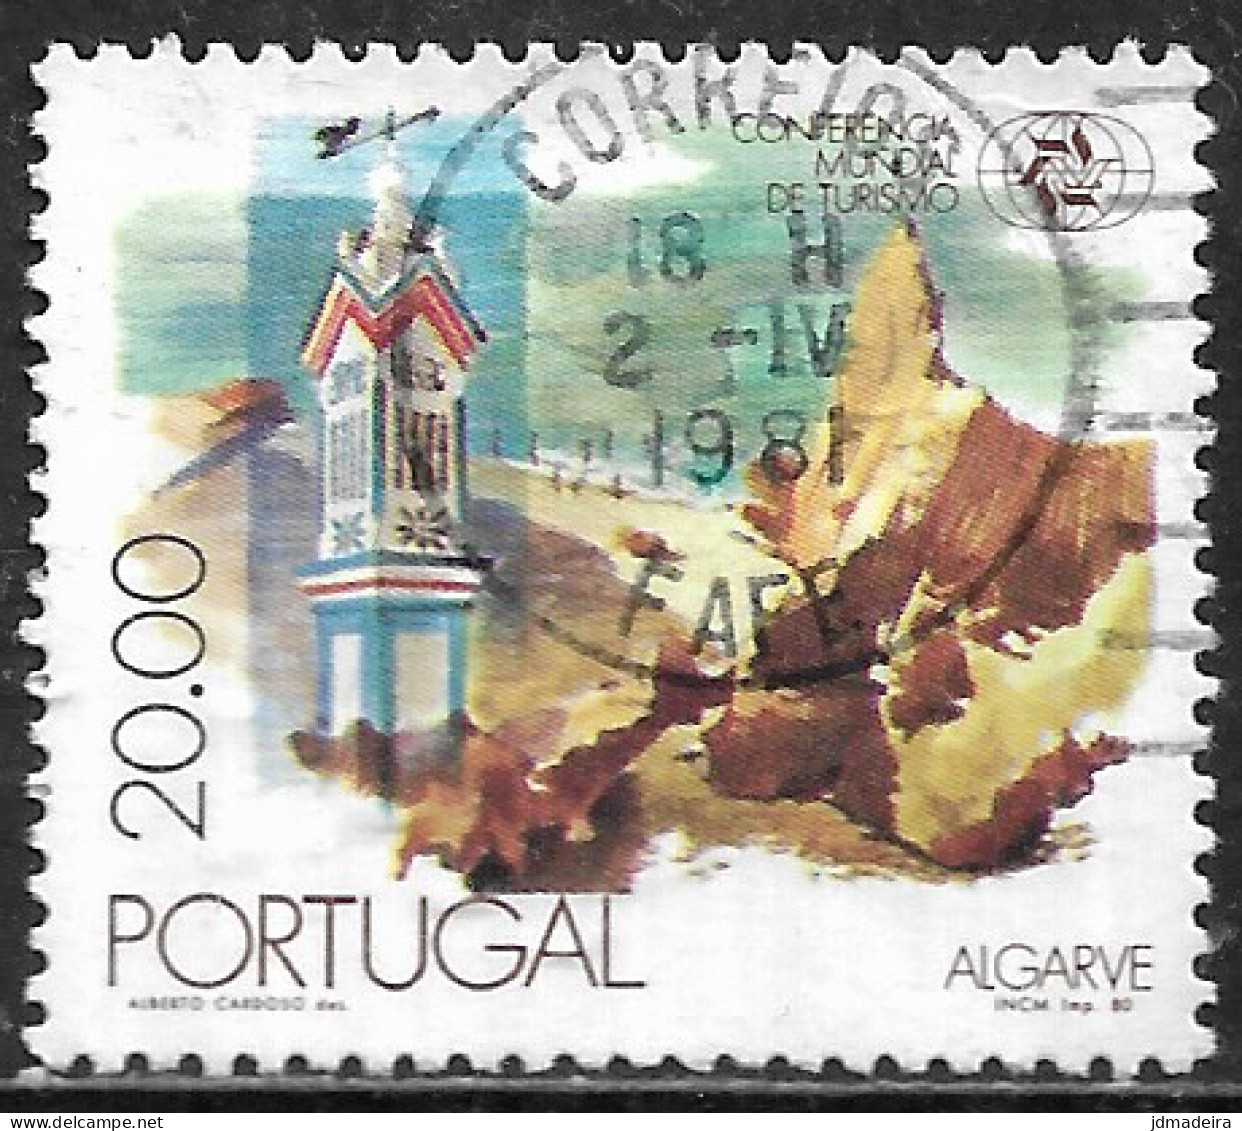 Portugal – 1980 Tourism 20.00 Used Stamp - Used Stamps